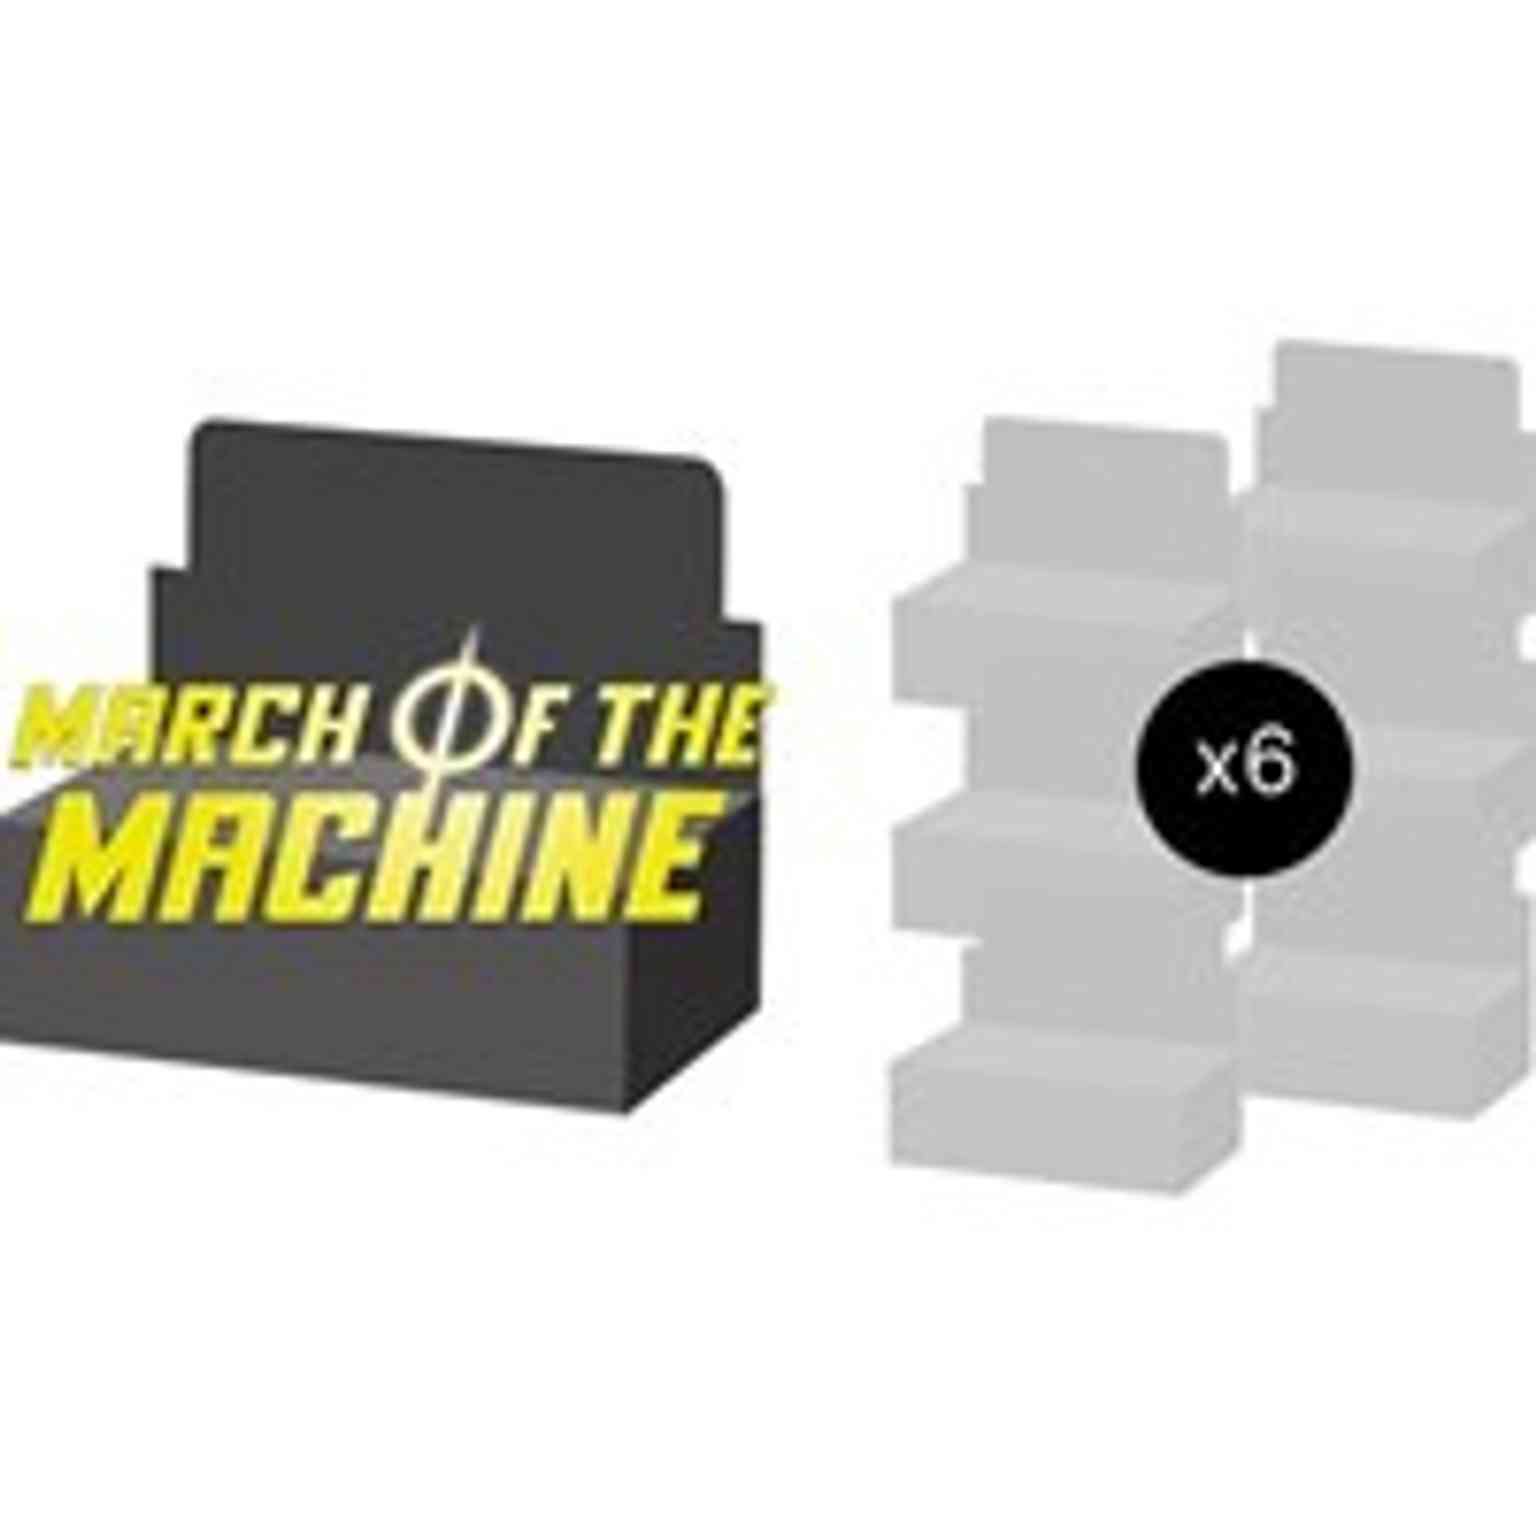 March of the Machine - Draft Booster Box Case magic card front